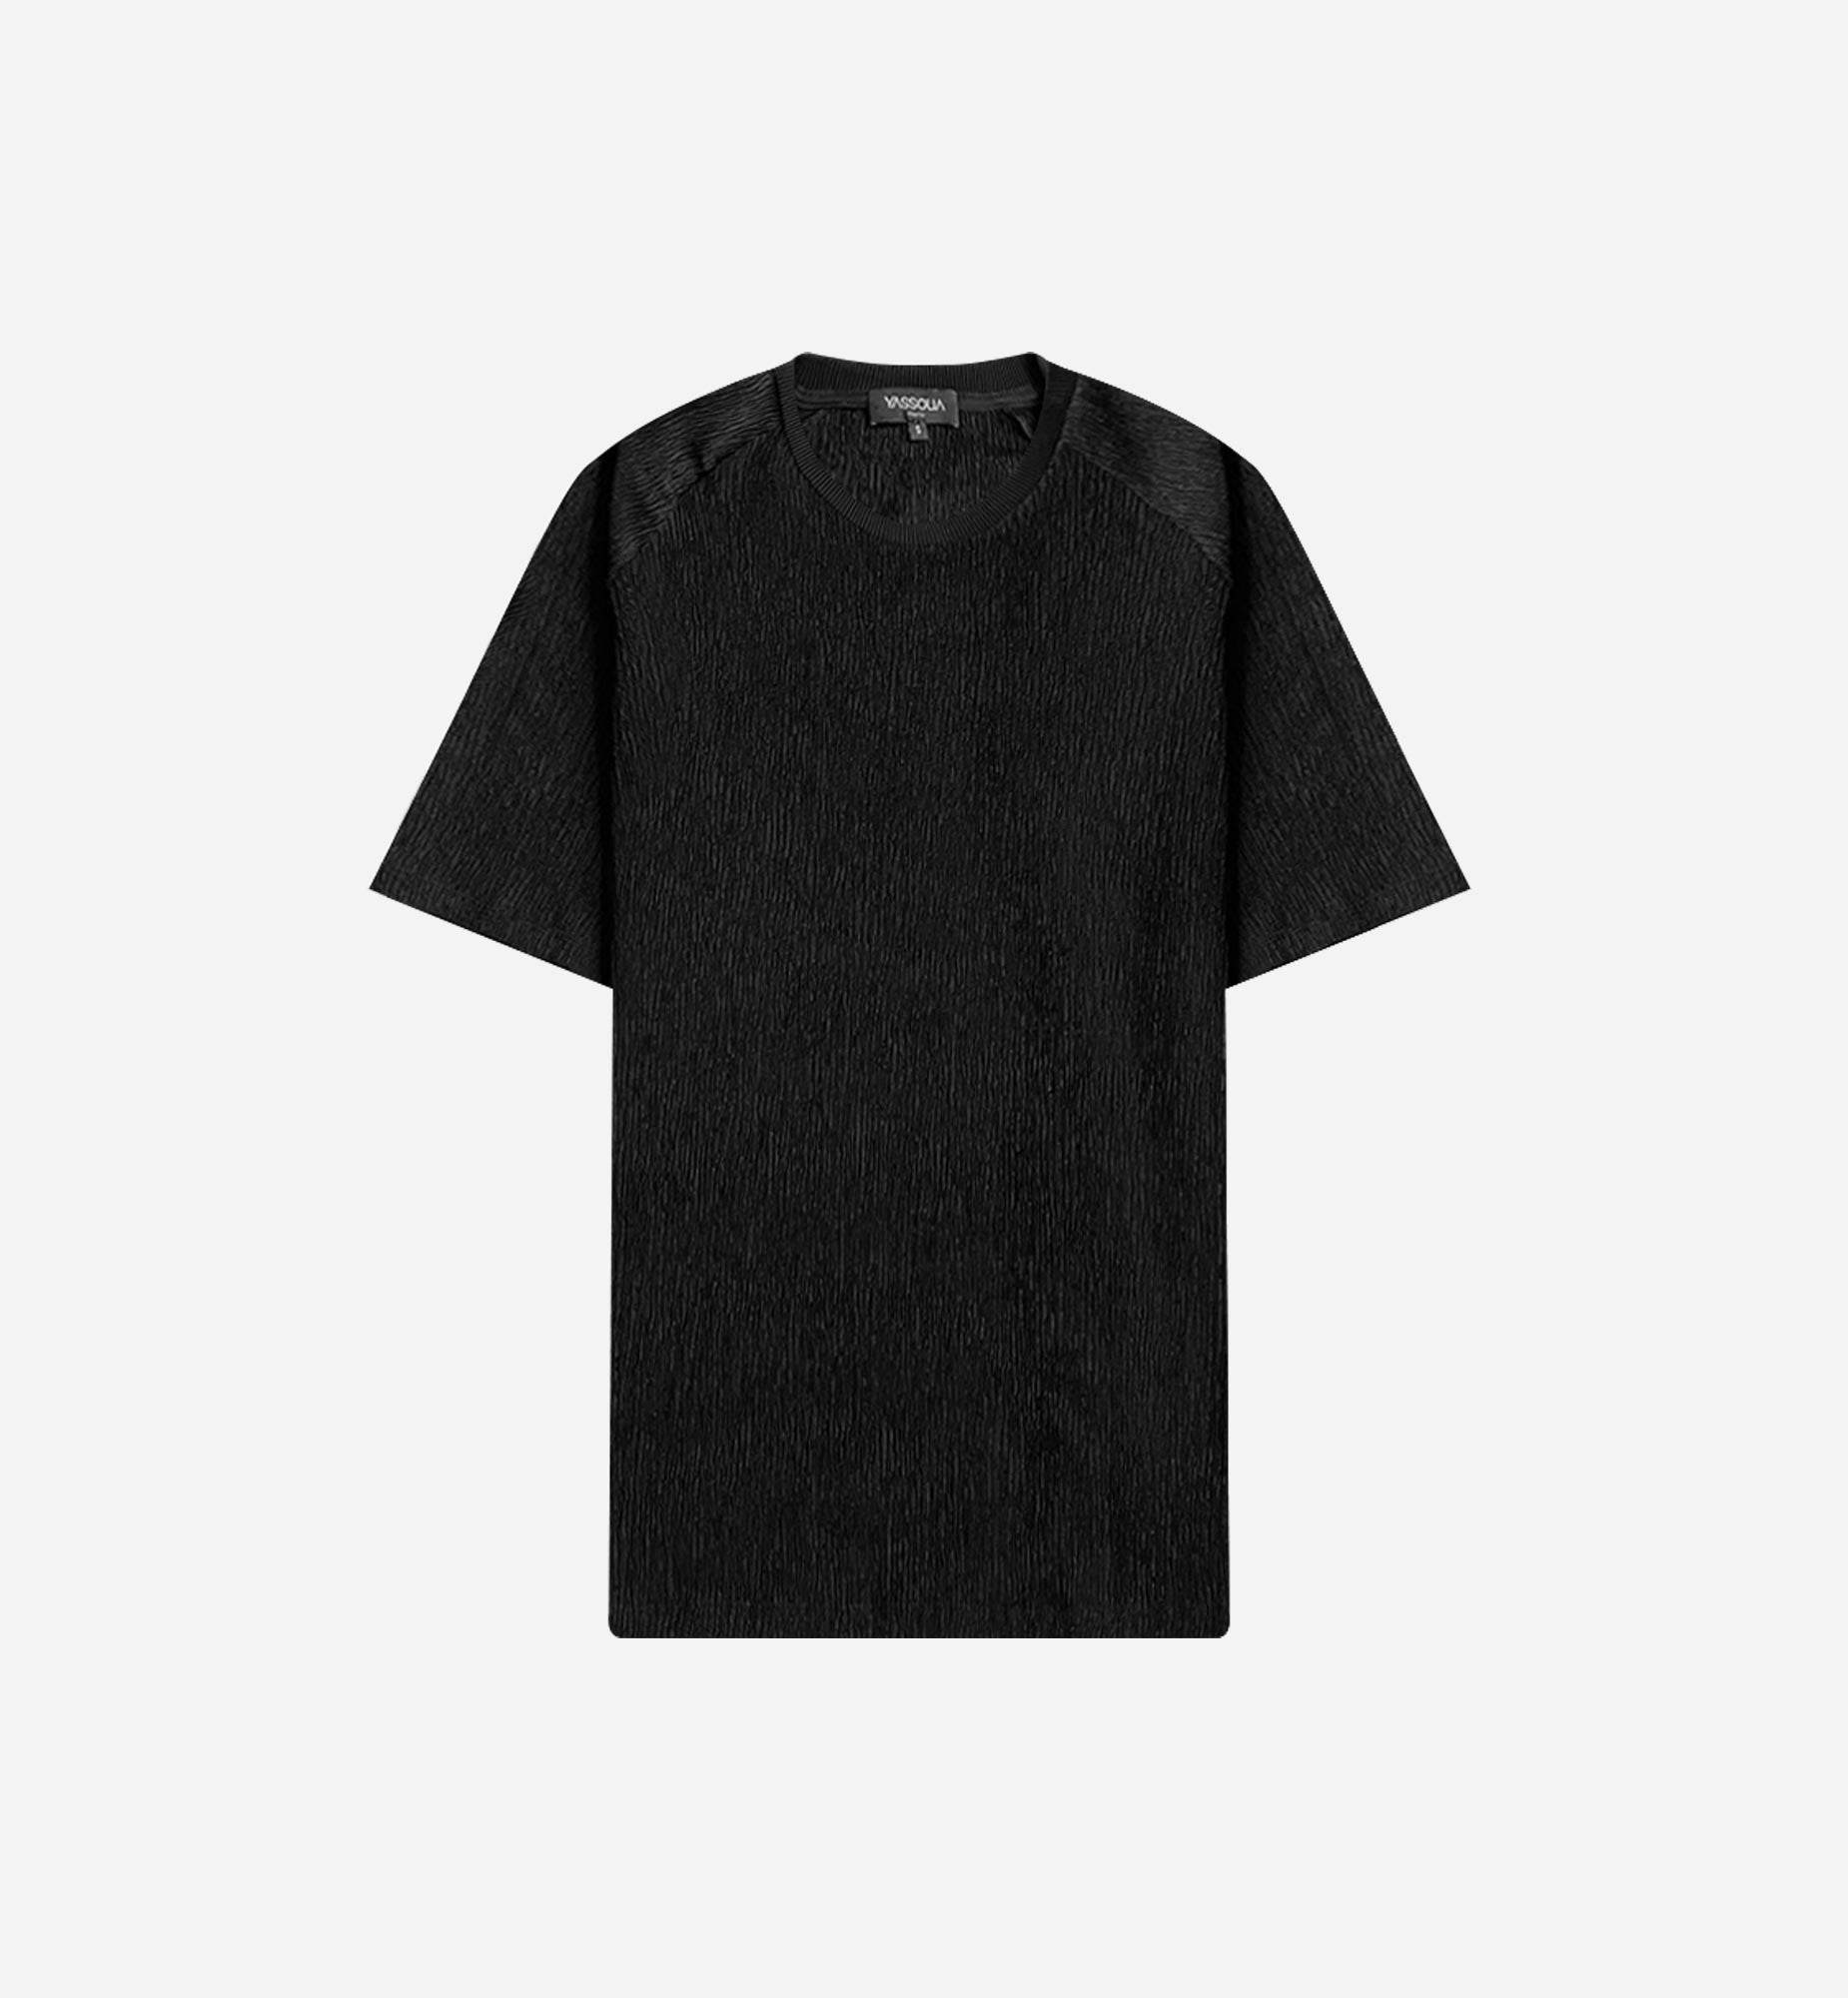 HERITAGE ICON RELAXED FIT T-SHIRT IN TEXTURED BLACK VISCOSE